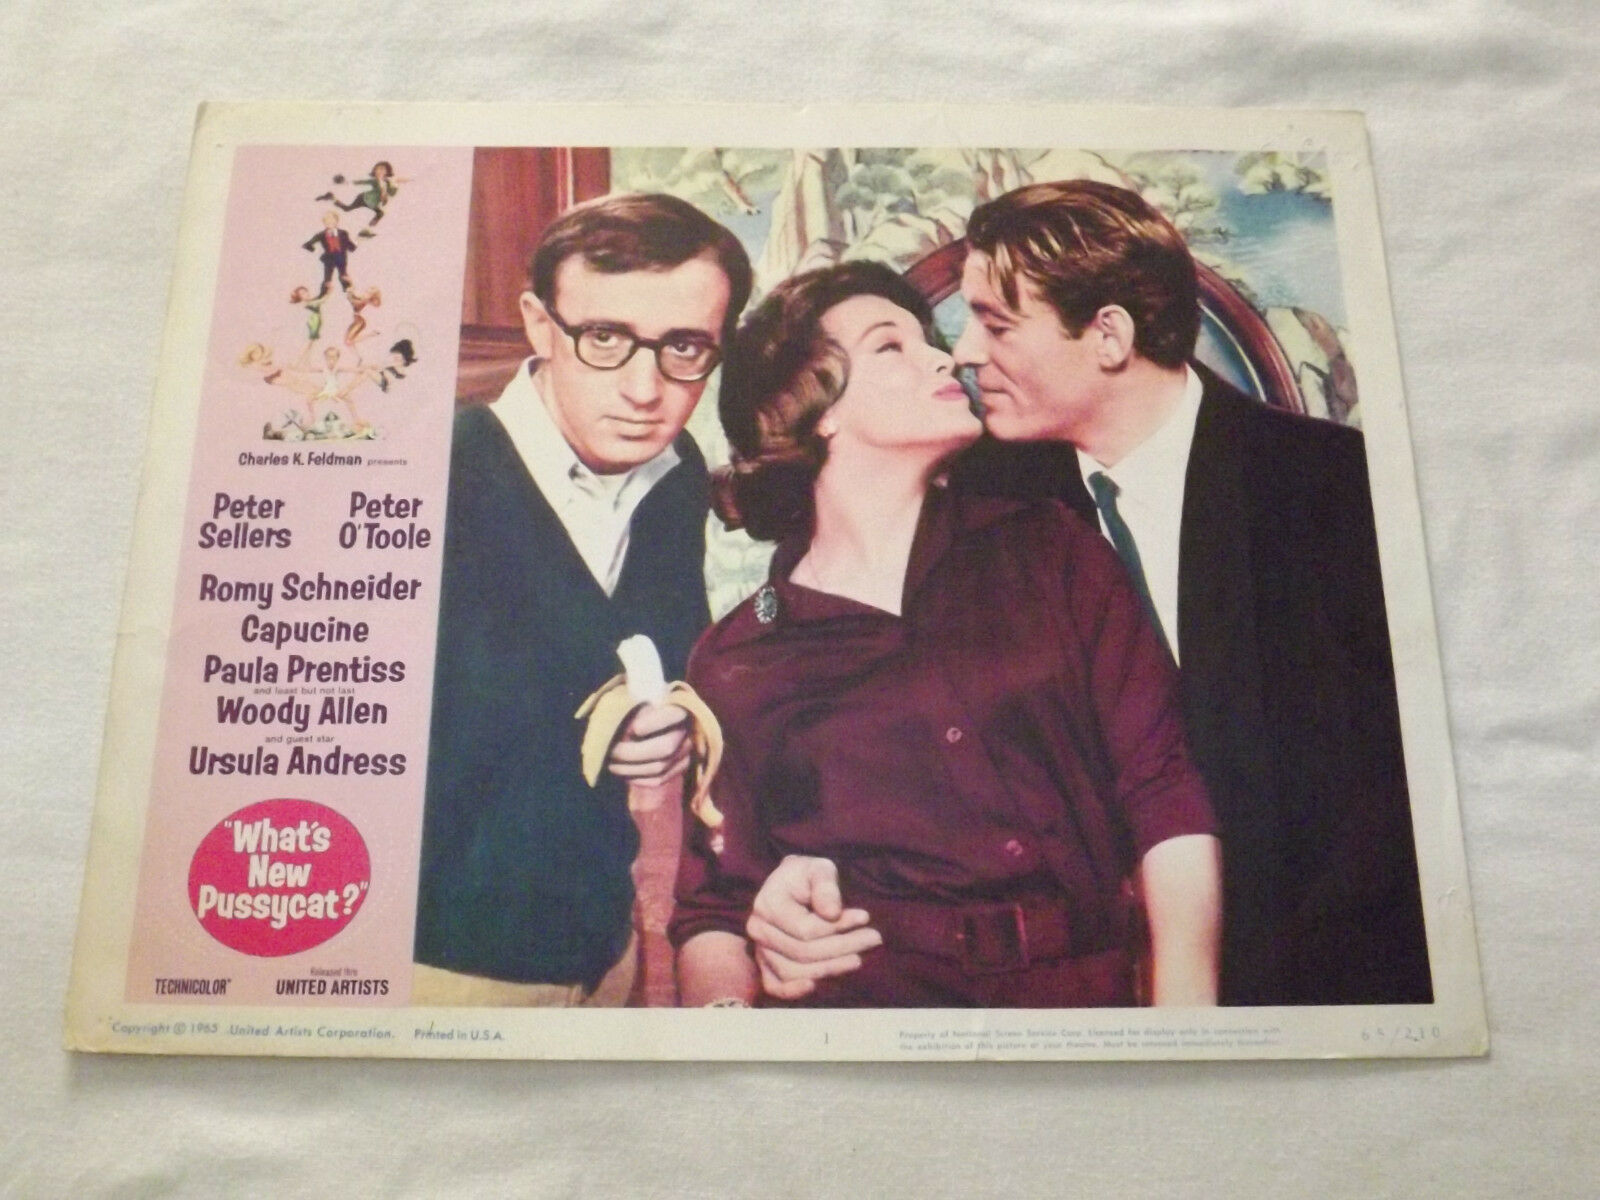 Vintage 1965 United Artists Peter Sellers What's New Pussycat Movie Poster